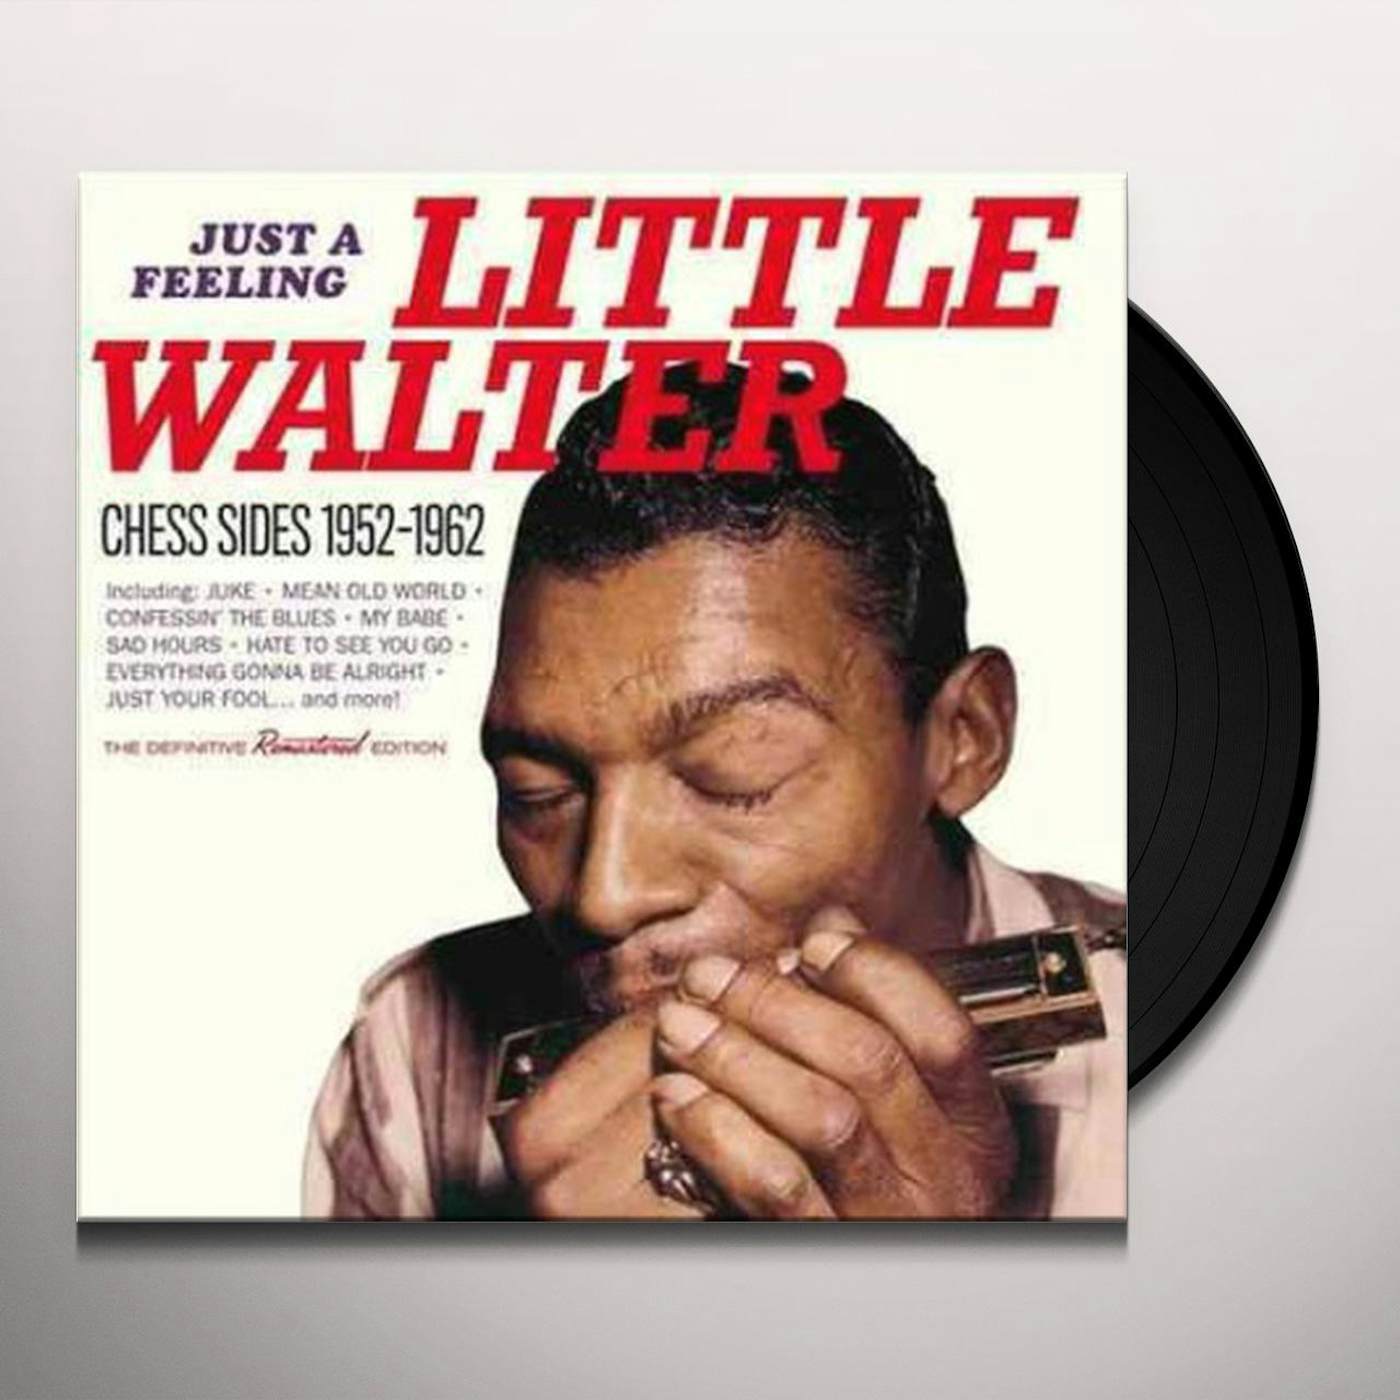 Just a Feeling: Chess Sides: 1952-1962: Little Walter Vinyl Record